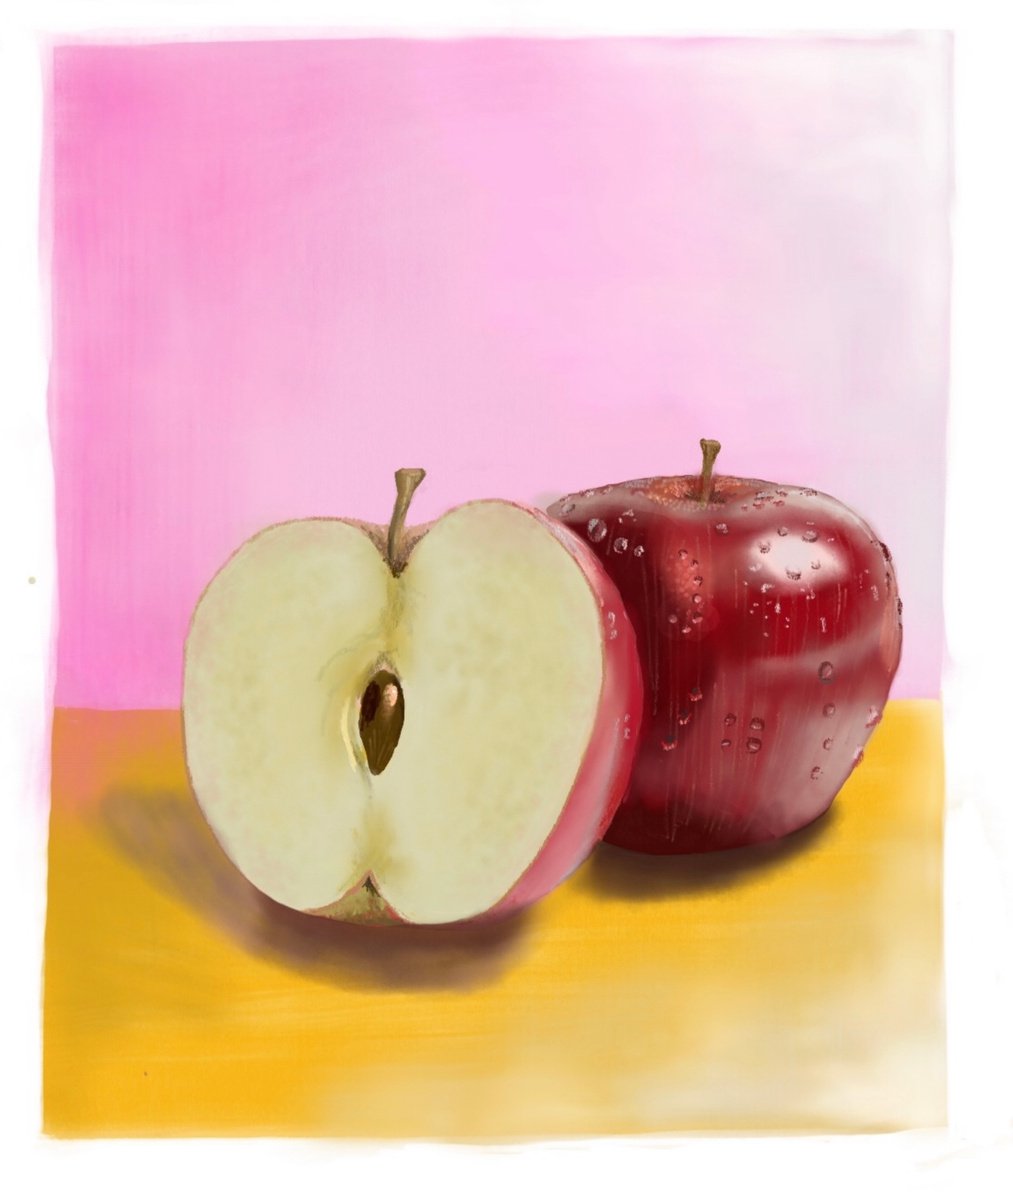 Apples by Paul Mitchell